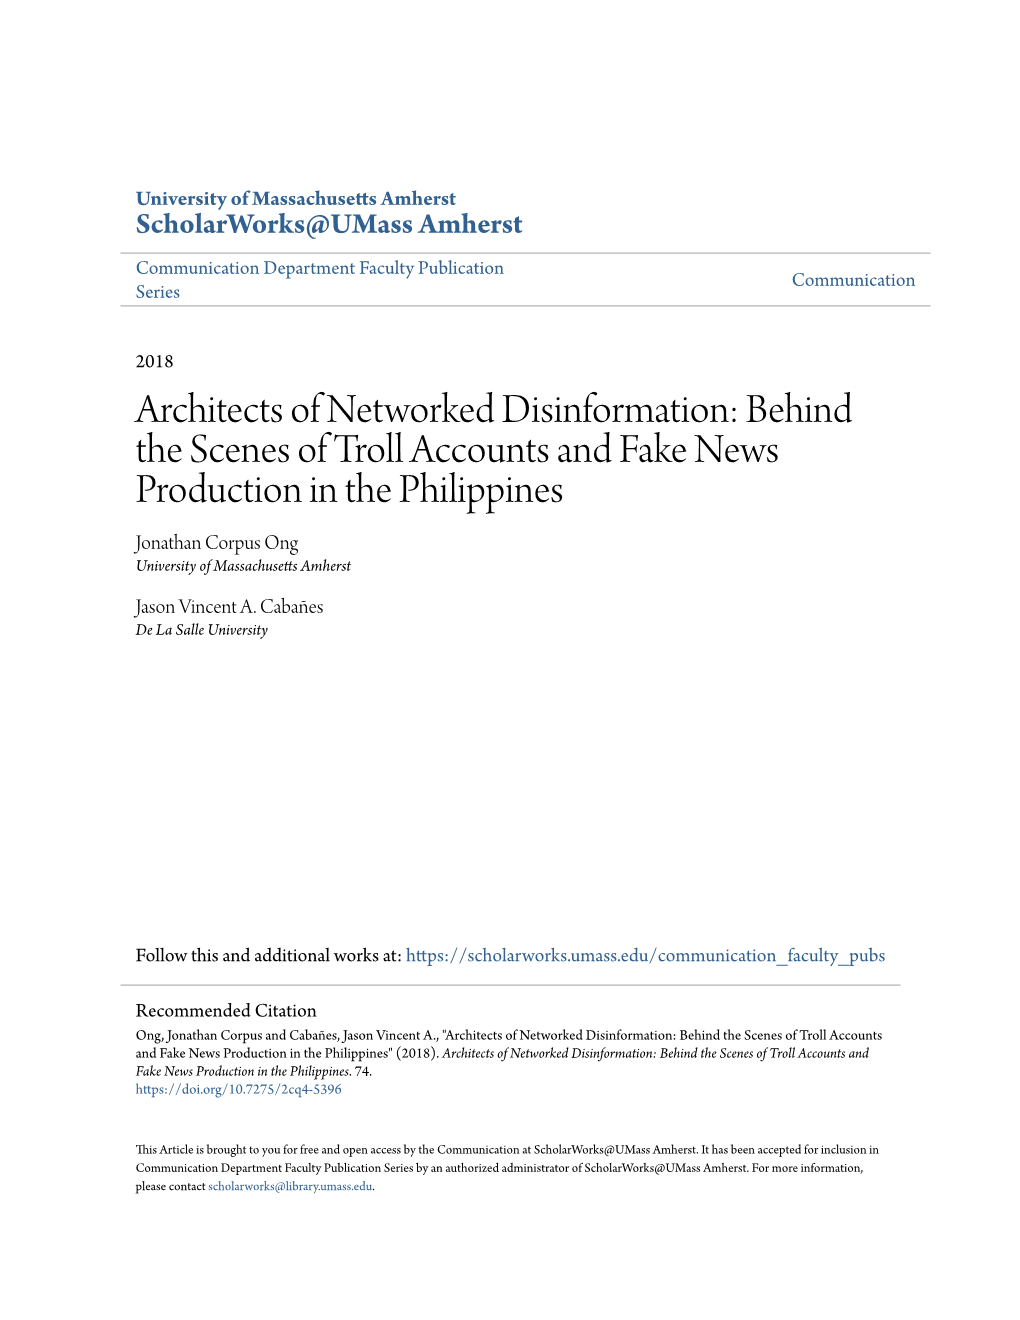 Behind the Scenes of Troll Accounts and Fake News Production in the Philippines Jonathan Corpus Ong University of Massachusetts Amherst